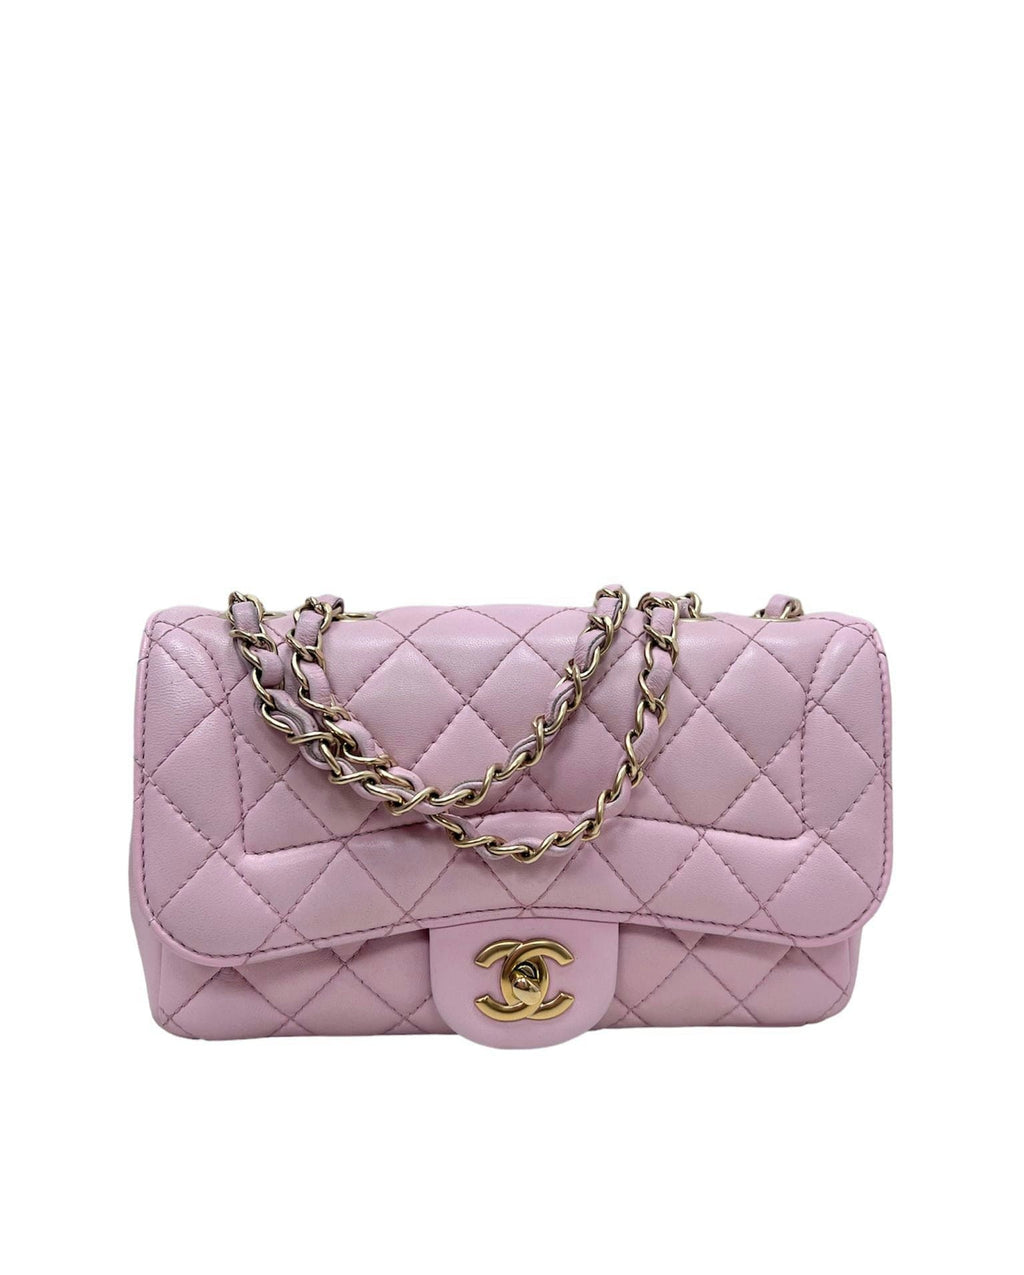 Chanel Mademoiselle Chic Flap Small Lilac Matte GHW SYC1027